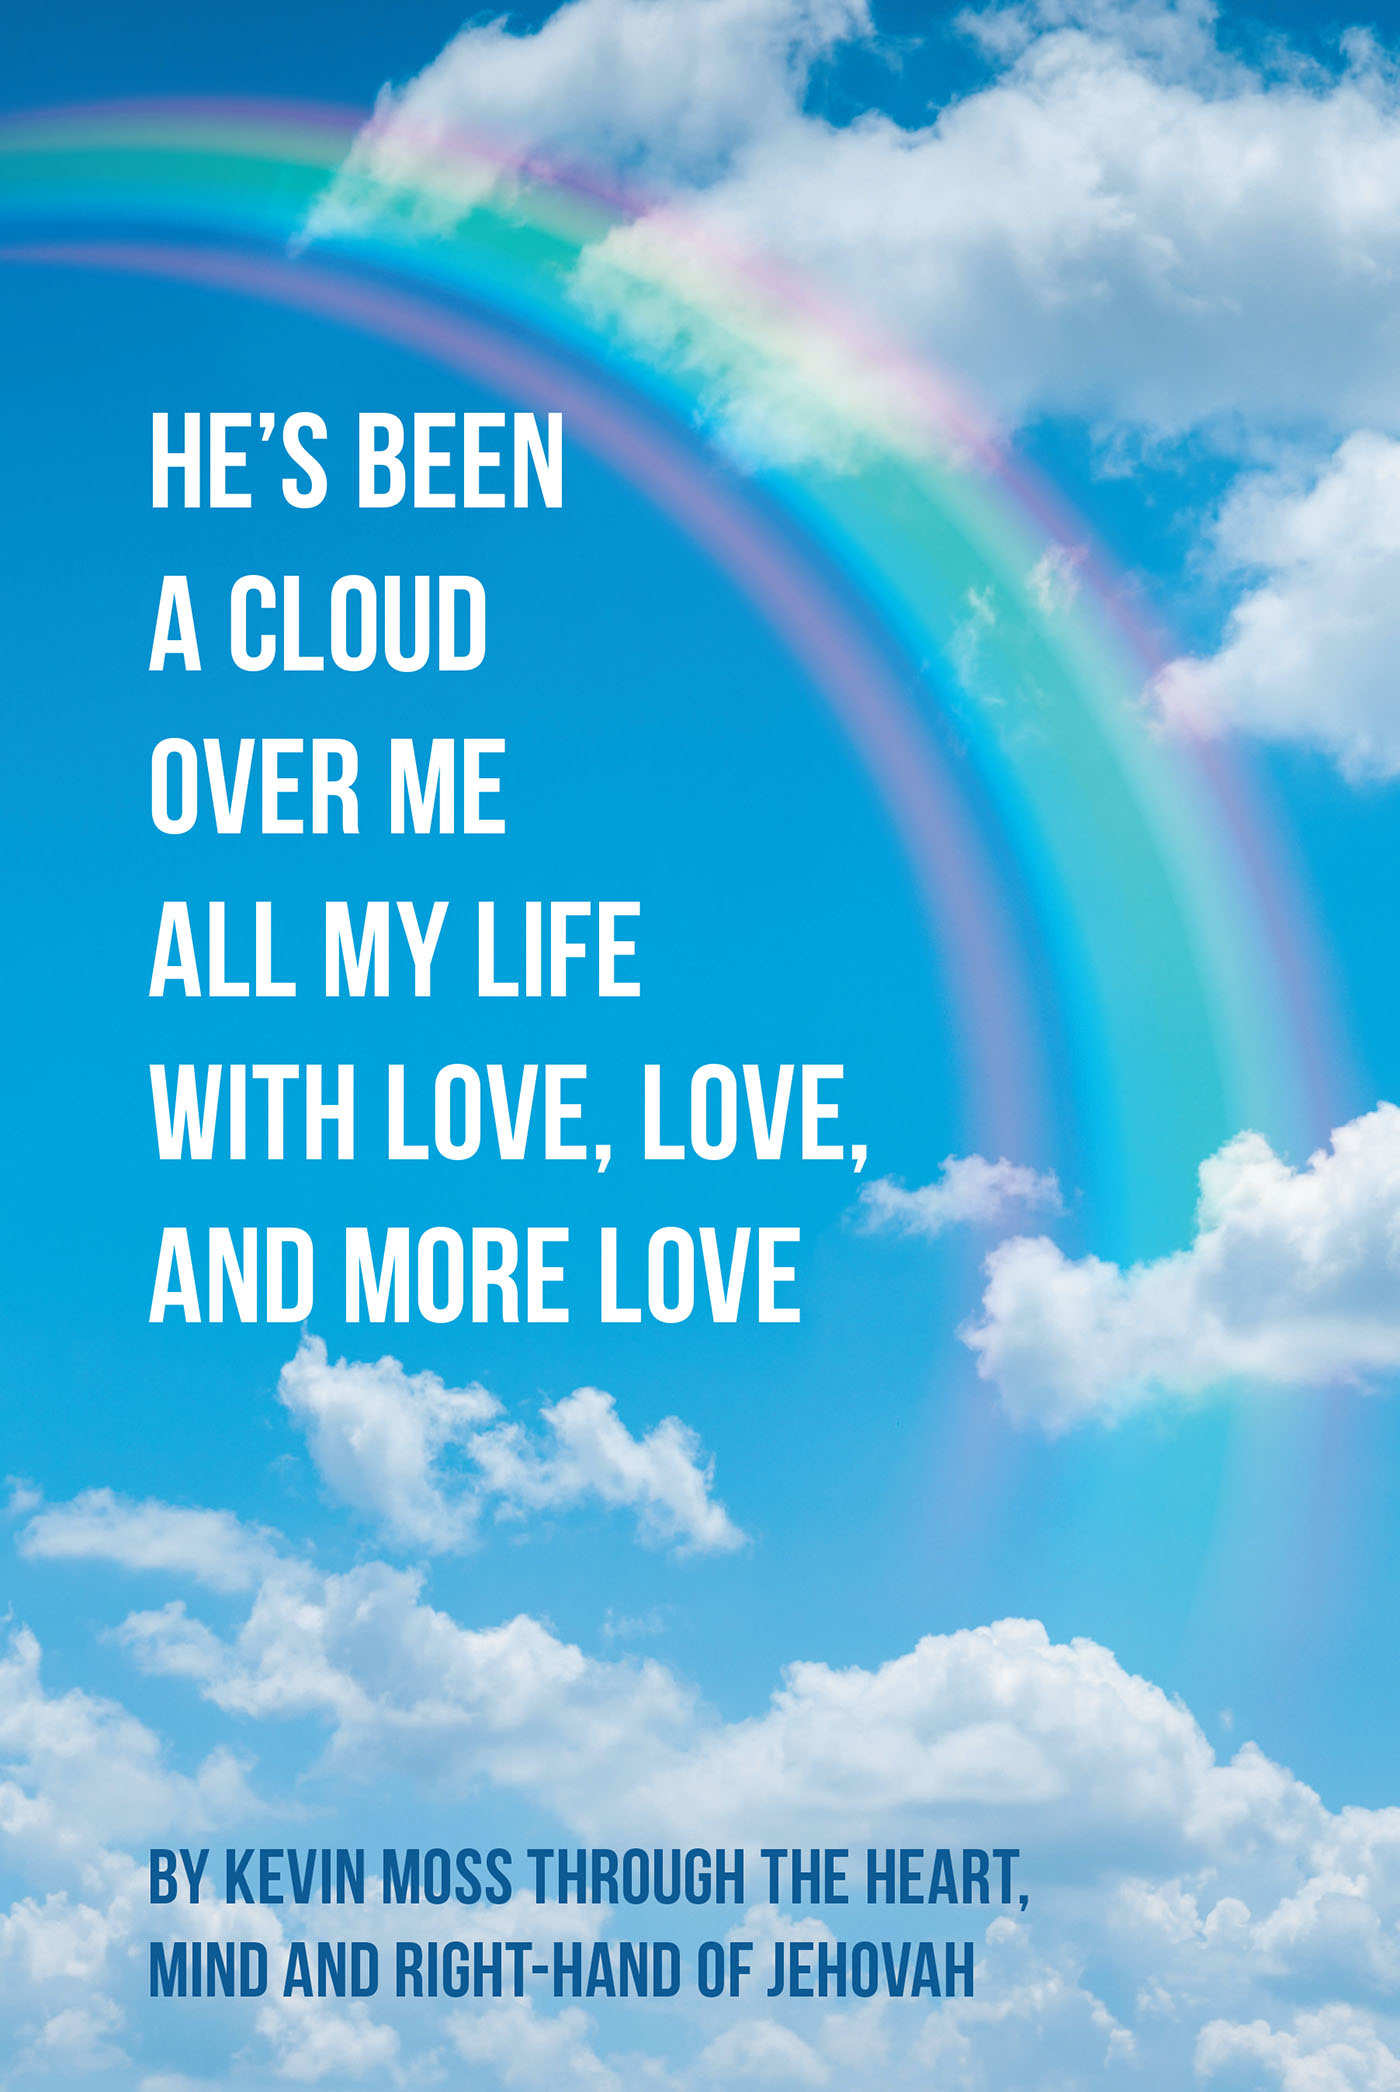 Author Kevin Moss’s New Book, “He's Been a Cloud over Me All My Life with Love, Love, and More Love,” Reveals How God Has Been an Ever-Present Part of the Author's Life